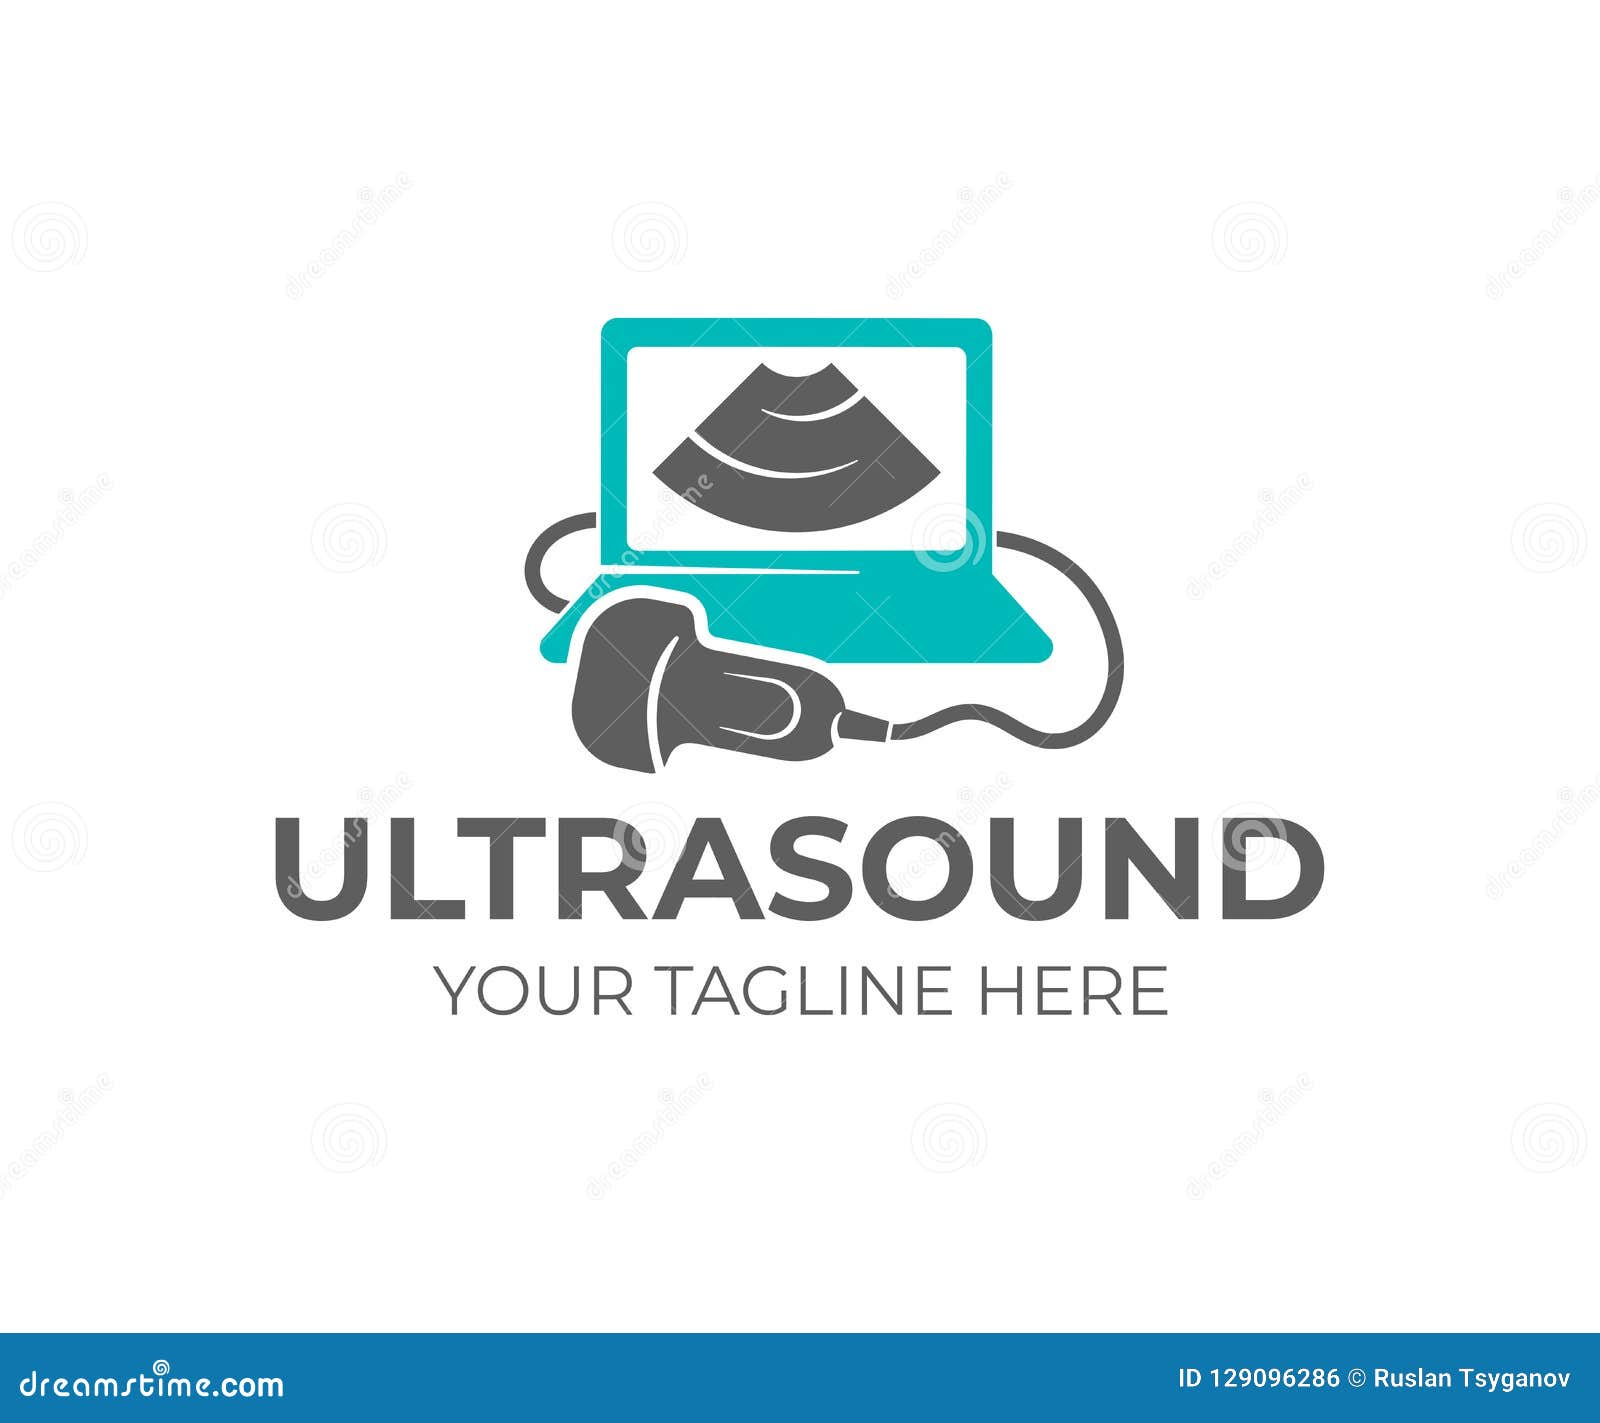 ultrasound diagnosis, ultrasound machine and sonogram, logo . medical research, gynecology clinic, polyclinics, obstetrics a